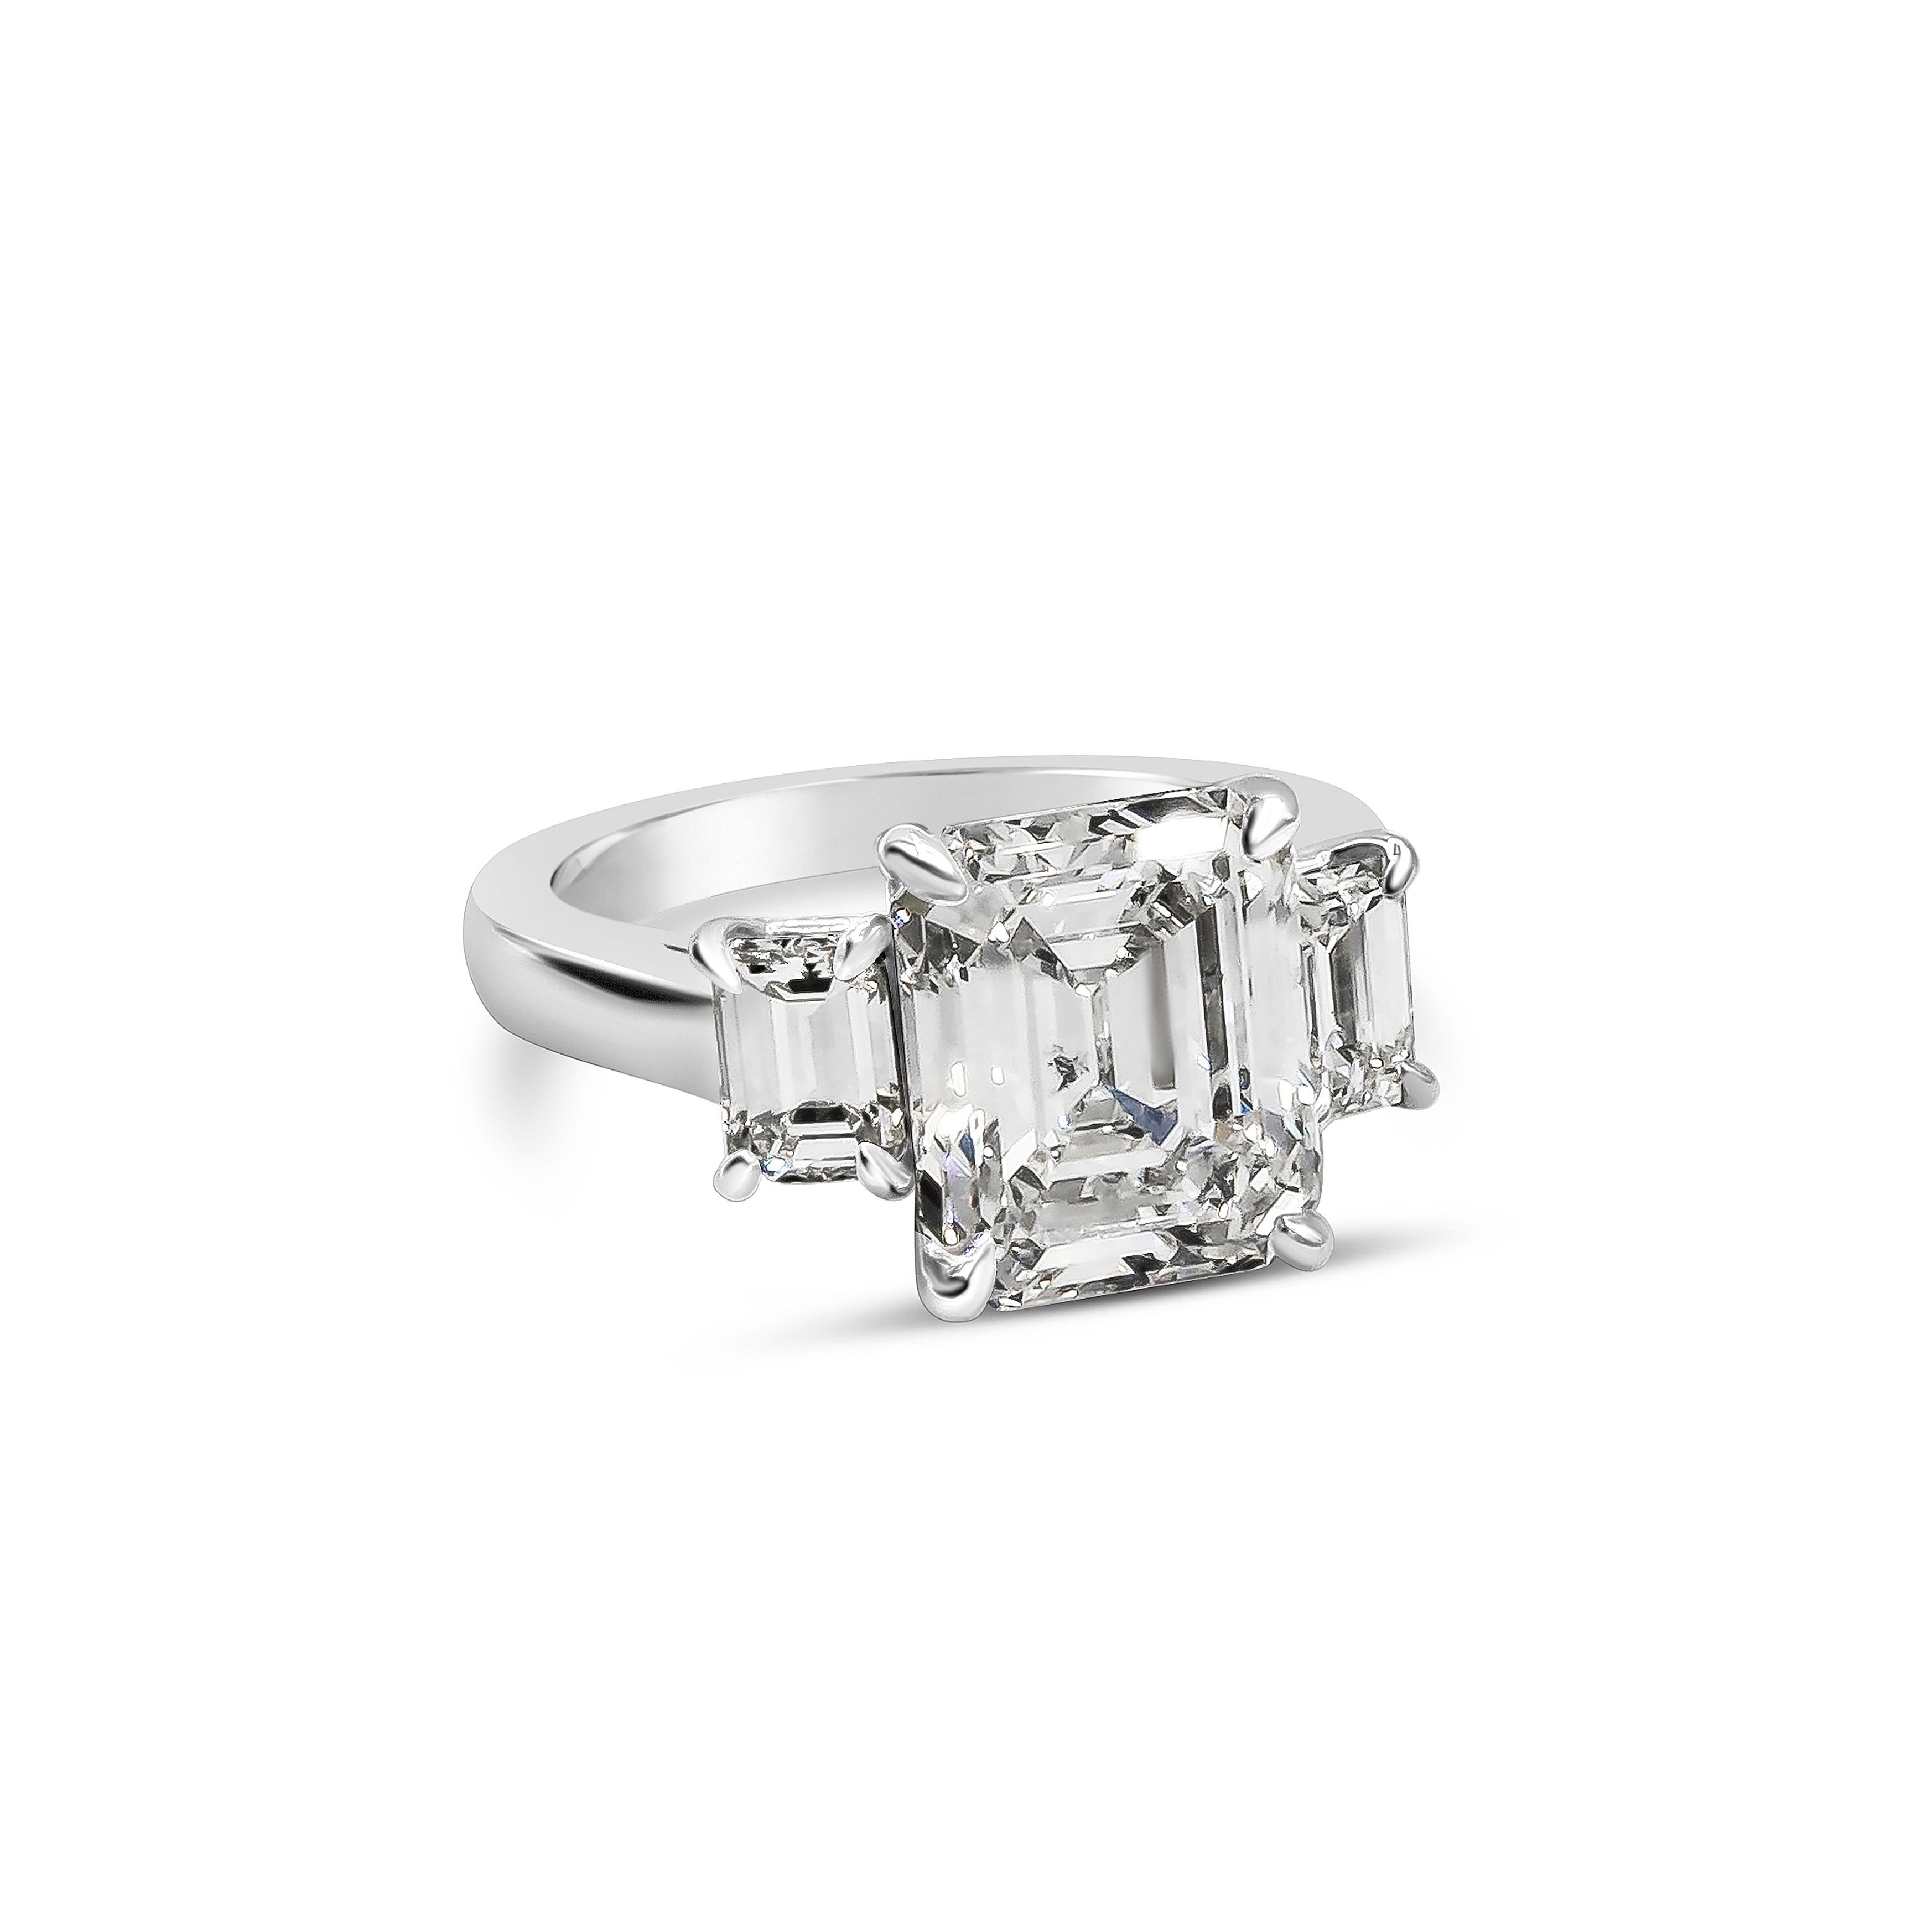 A sophisticated and subtle engagement ring style showcasing a 5.16 carats emerald cut diamond certified by GIA as H color and SI2 in clarity, set in four prong platinum. Flanked by smaller emerald cut diamonds on each side, weighing 1.11 carats